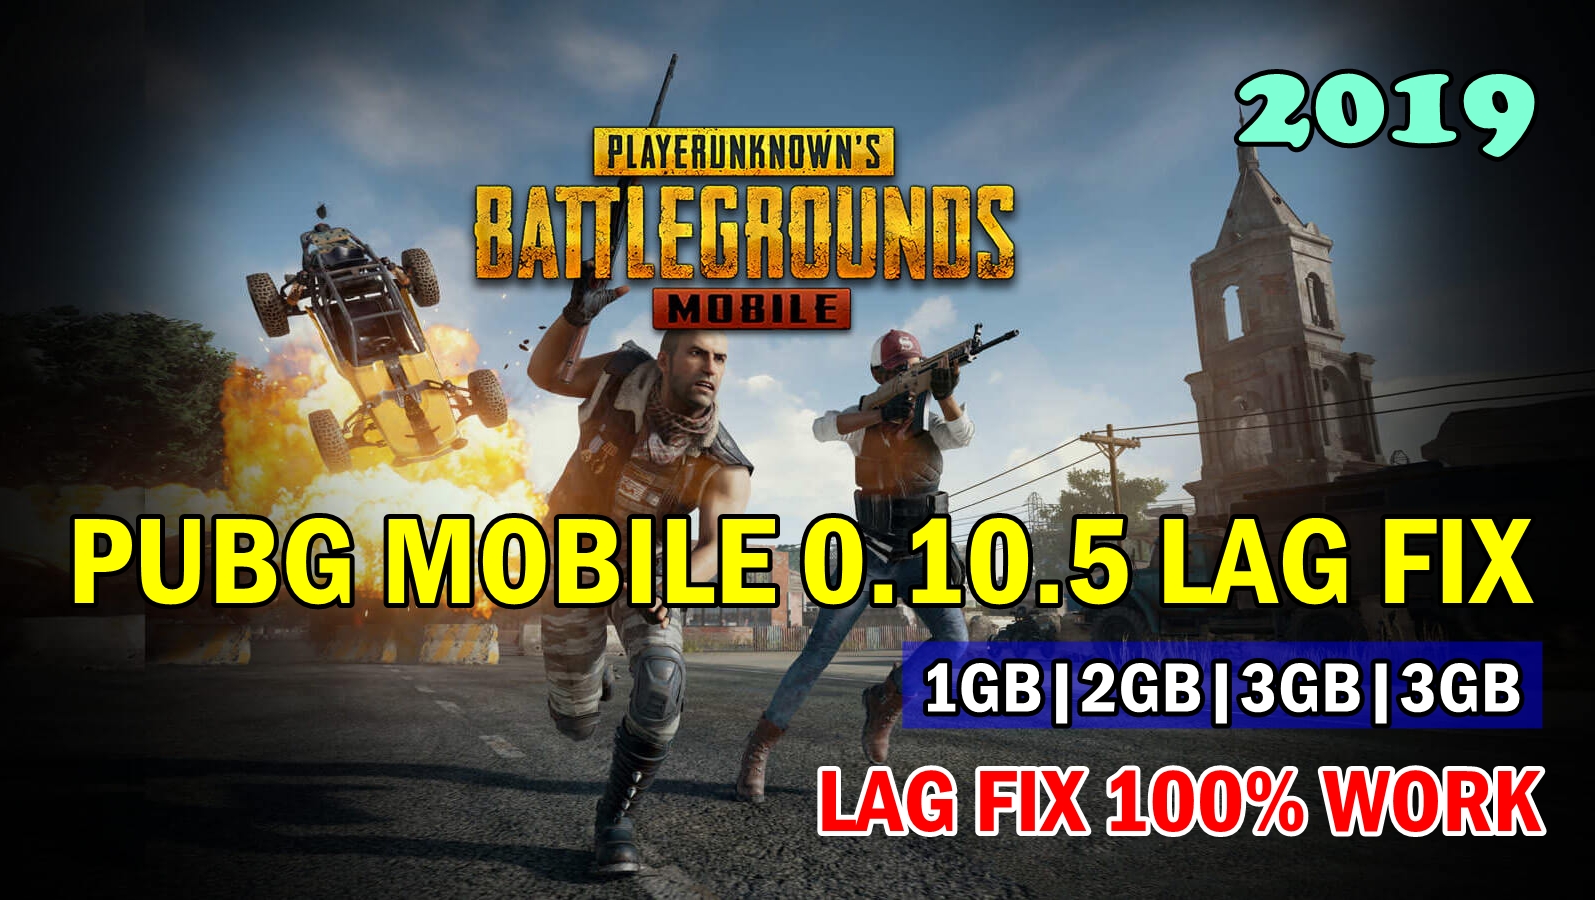 Download failed because you may not have purchased this app pubg mobile что делать фото 8